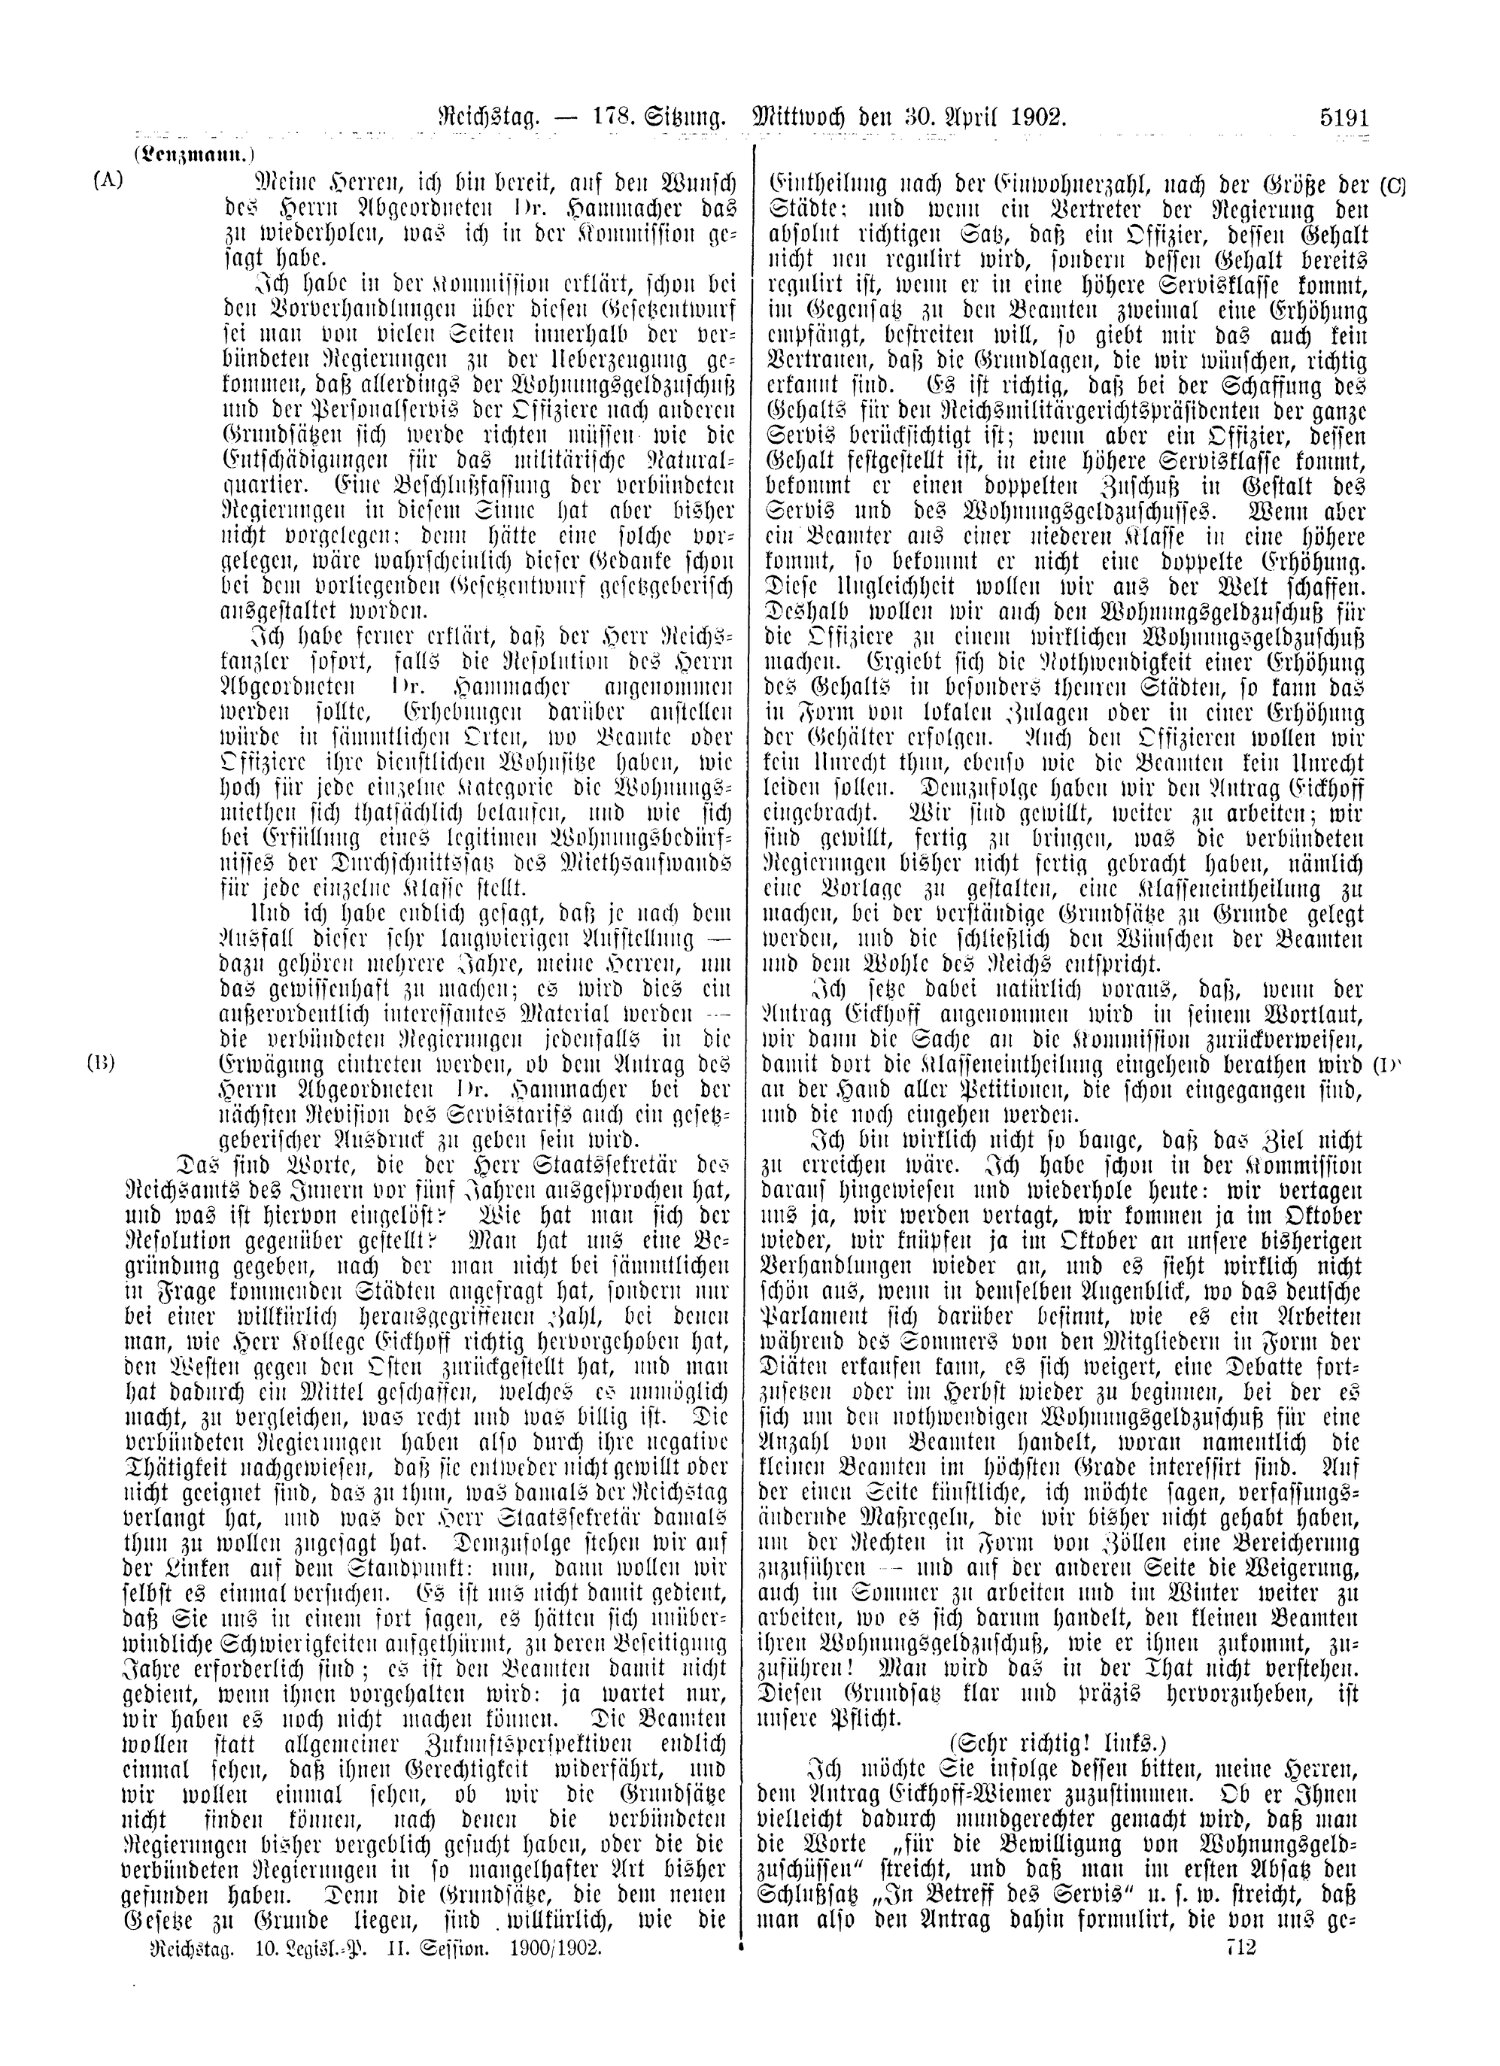 Scan of page 5191